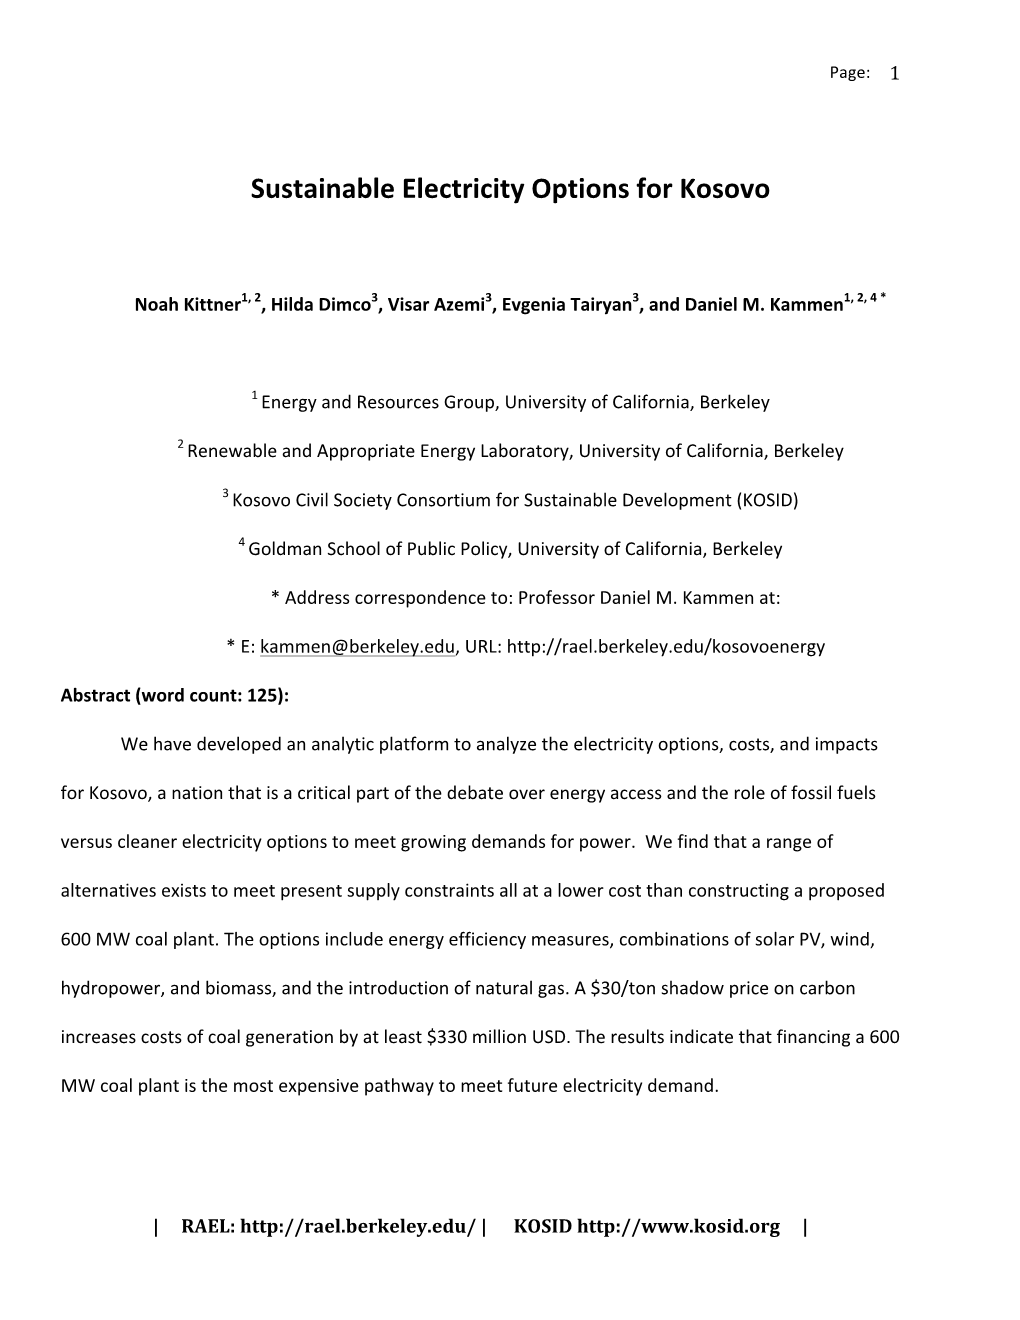 Sustainable Electricity Options for Kosovo